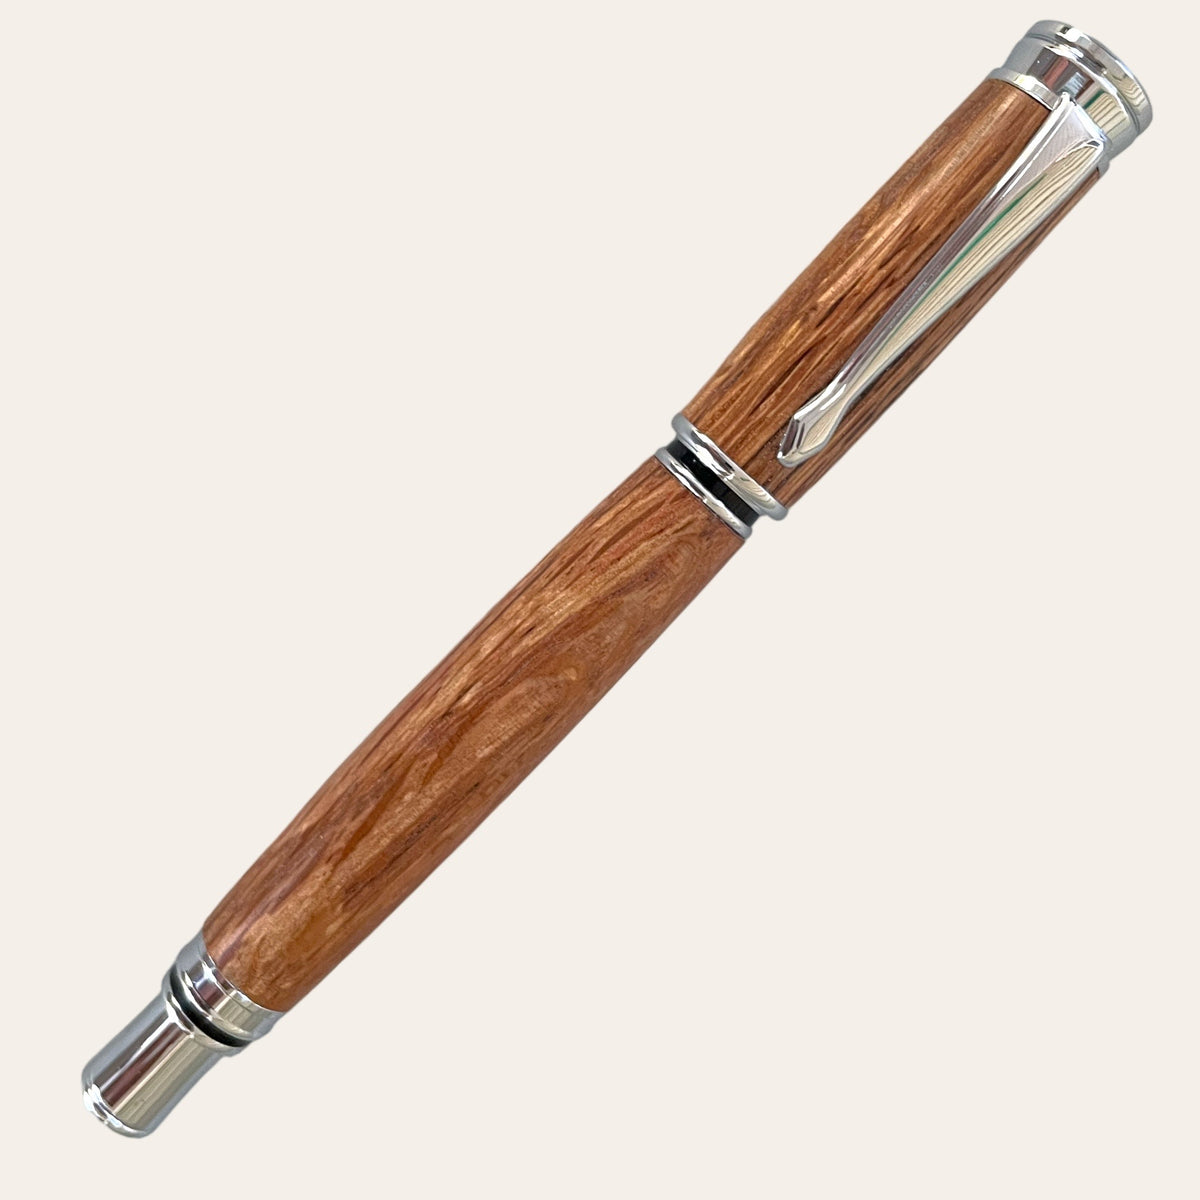 Hand turned Jr. Gentleman pen with magnetic cap, rollerball, chrome trim. Paul's Hand Turned Creations